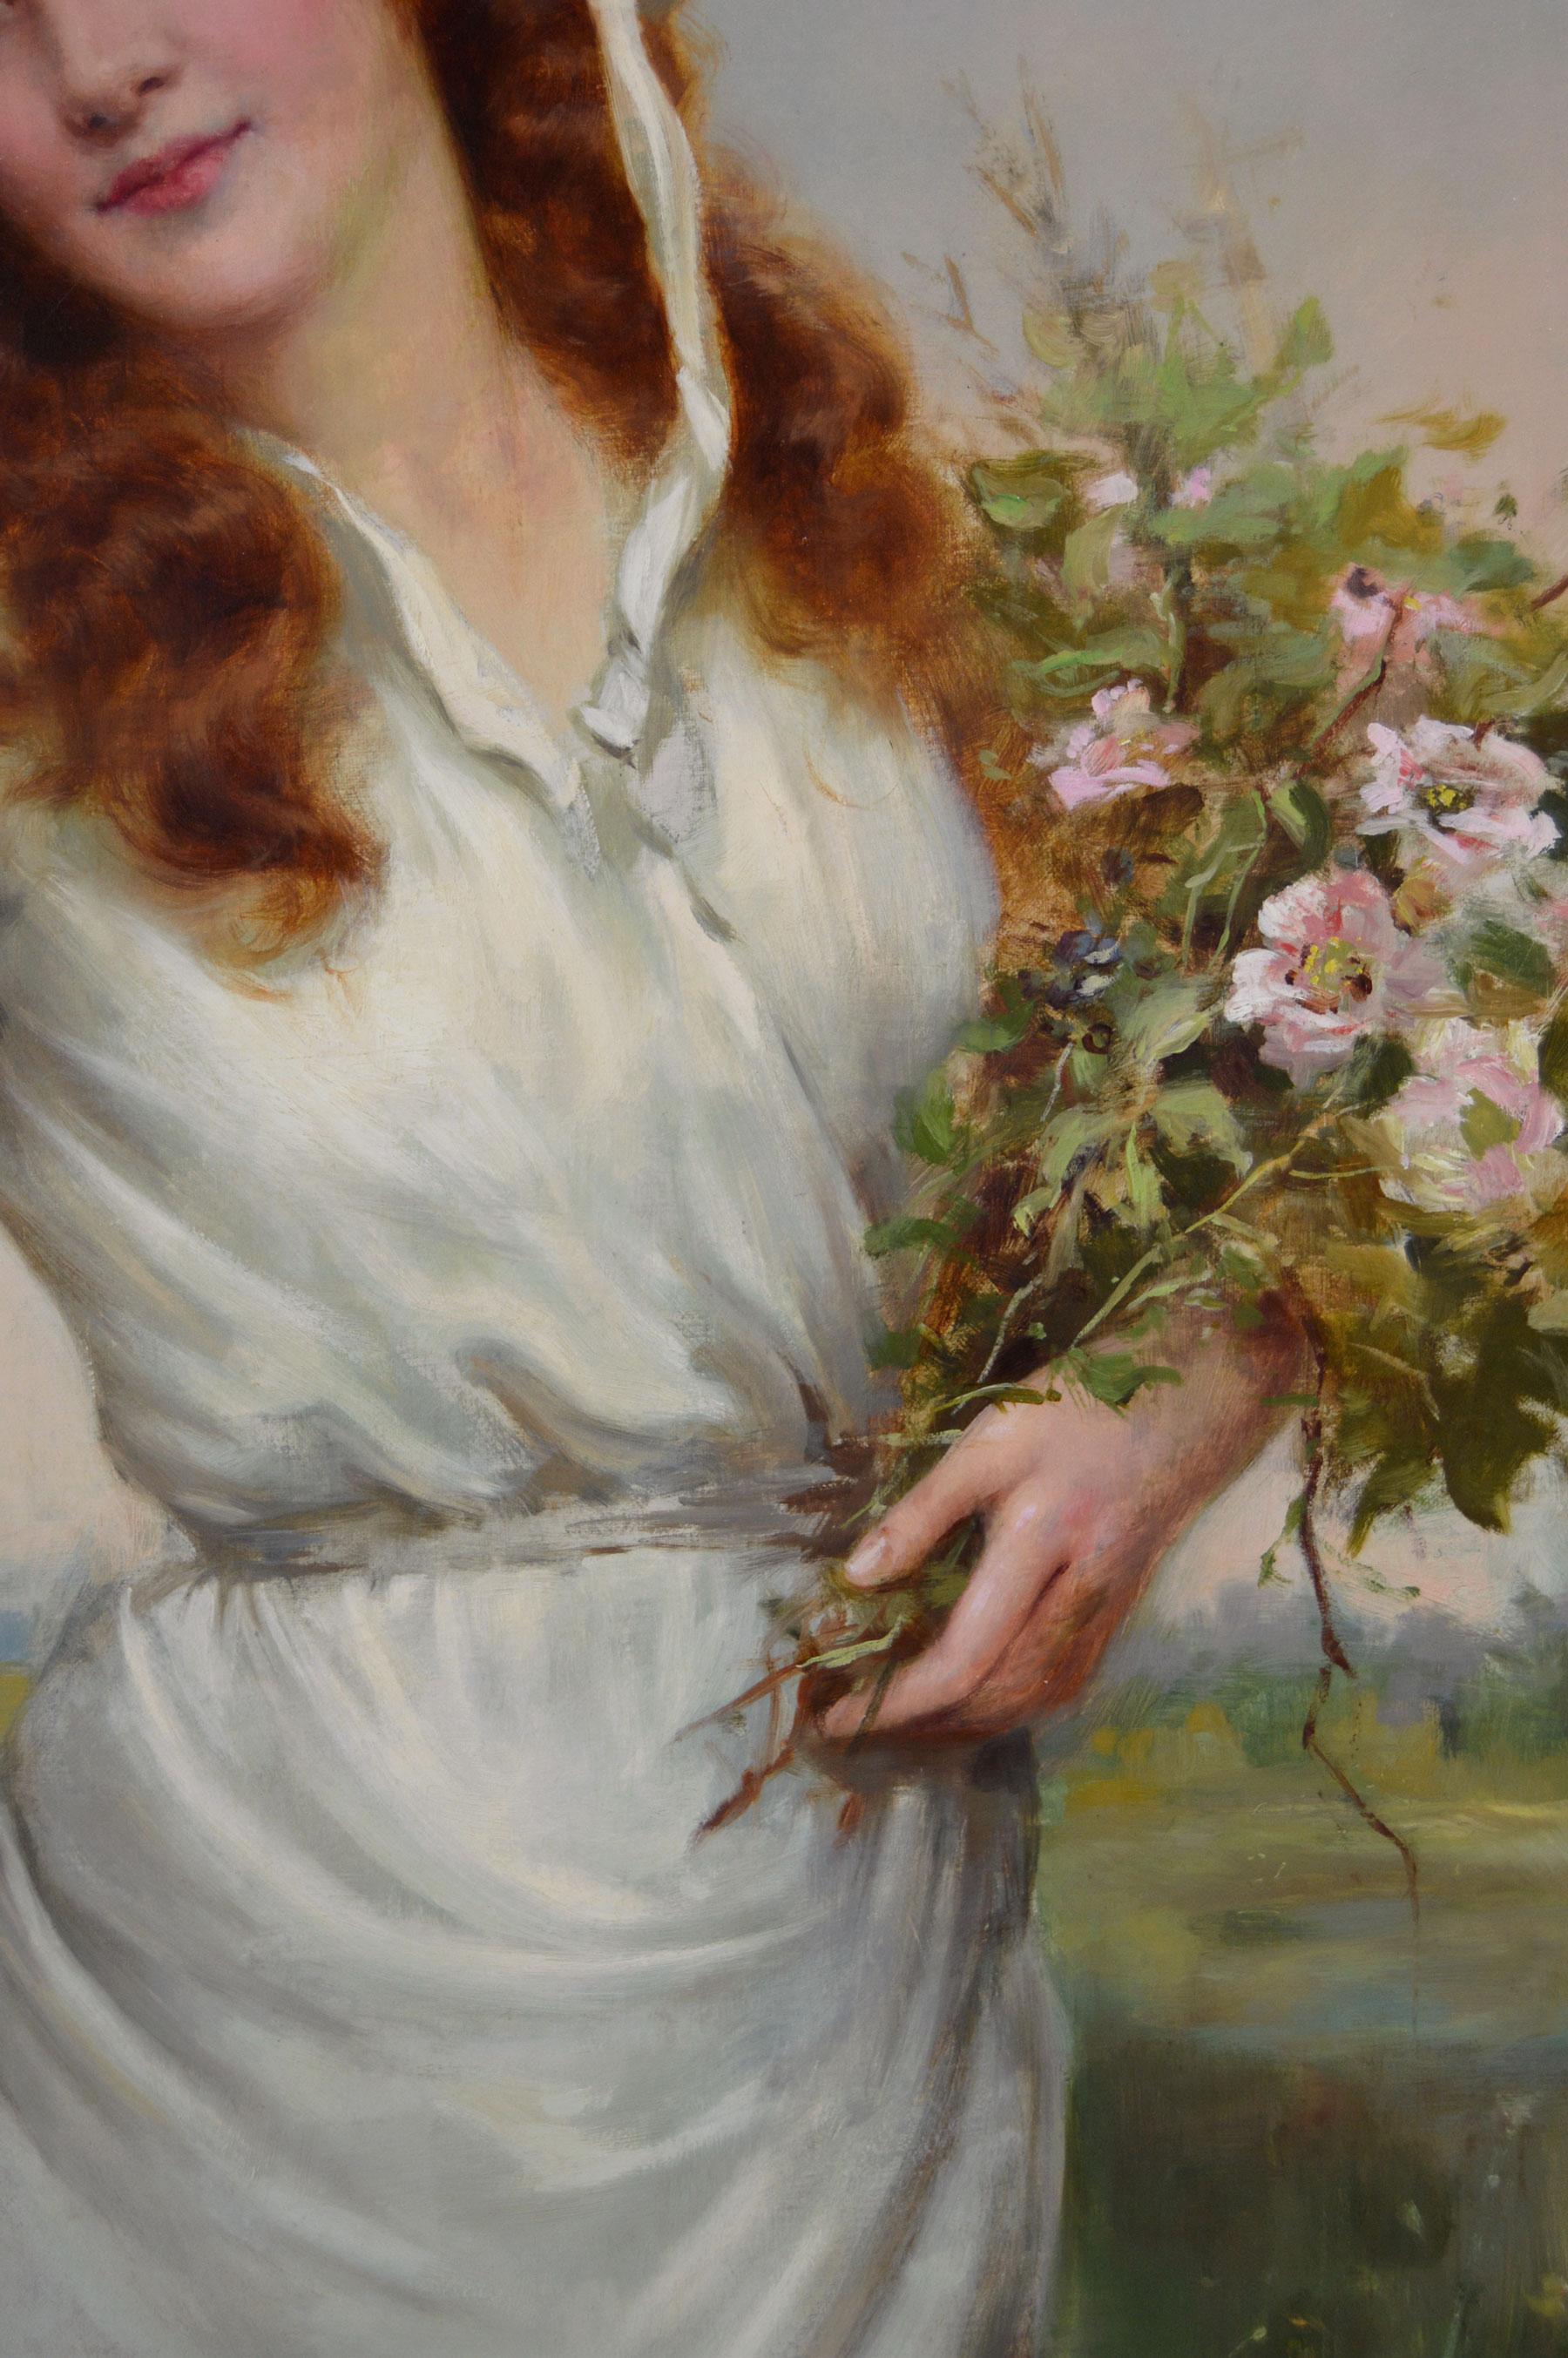 William Joseph Carroll
British, (1872-1924)
Picking Flowers
Oil on canvas, signed
Image size: 35.25 inches x 27.25 inches 
Size including frame: 44.25 inches x 36.25 inches

A captivating three-quarter length painting of a young woman picking